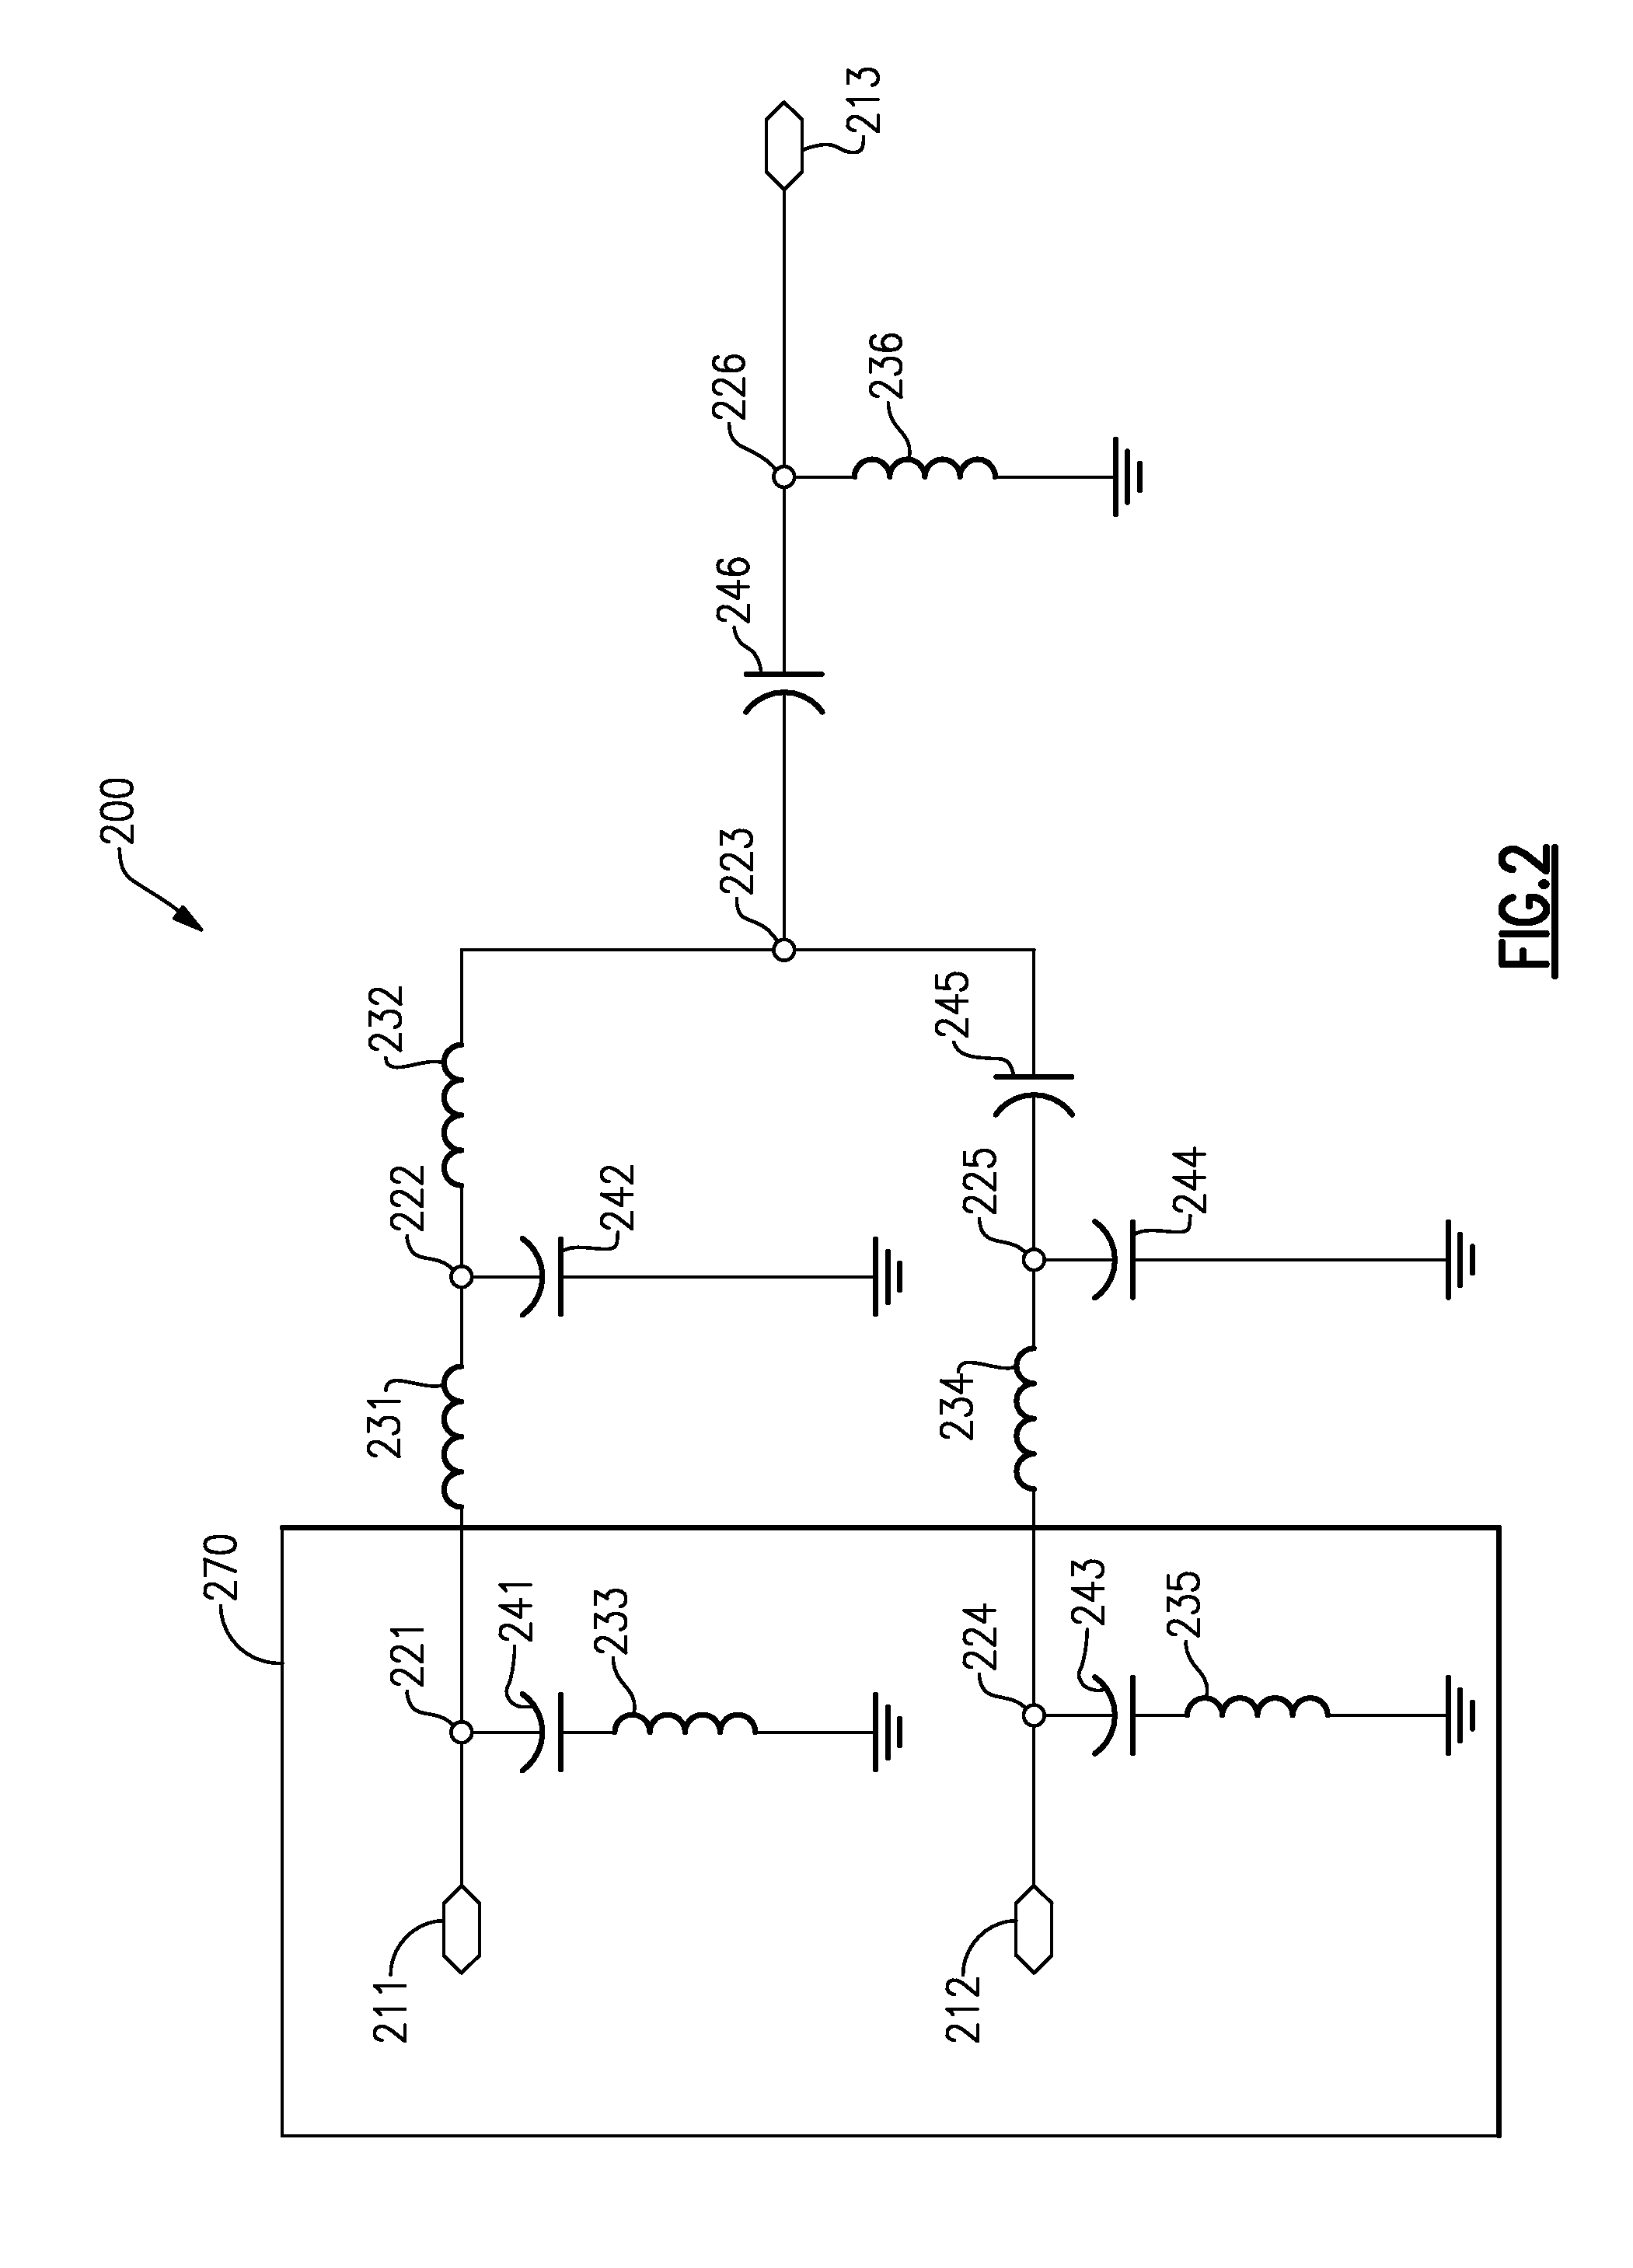 Systems and methods related to linear load modulated power amplifiers